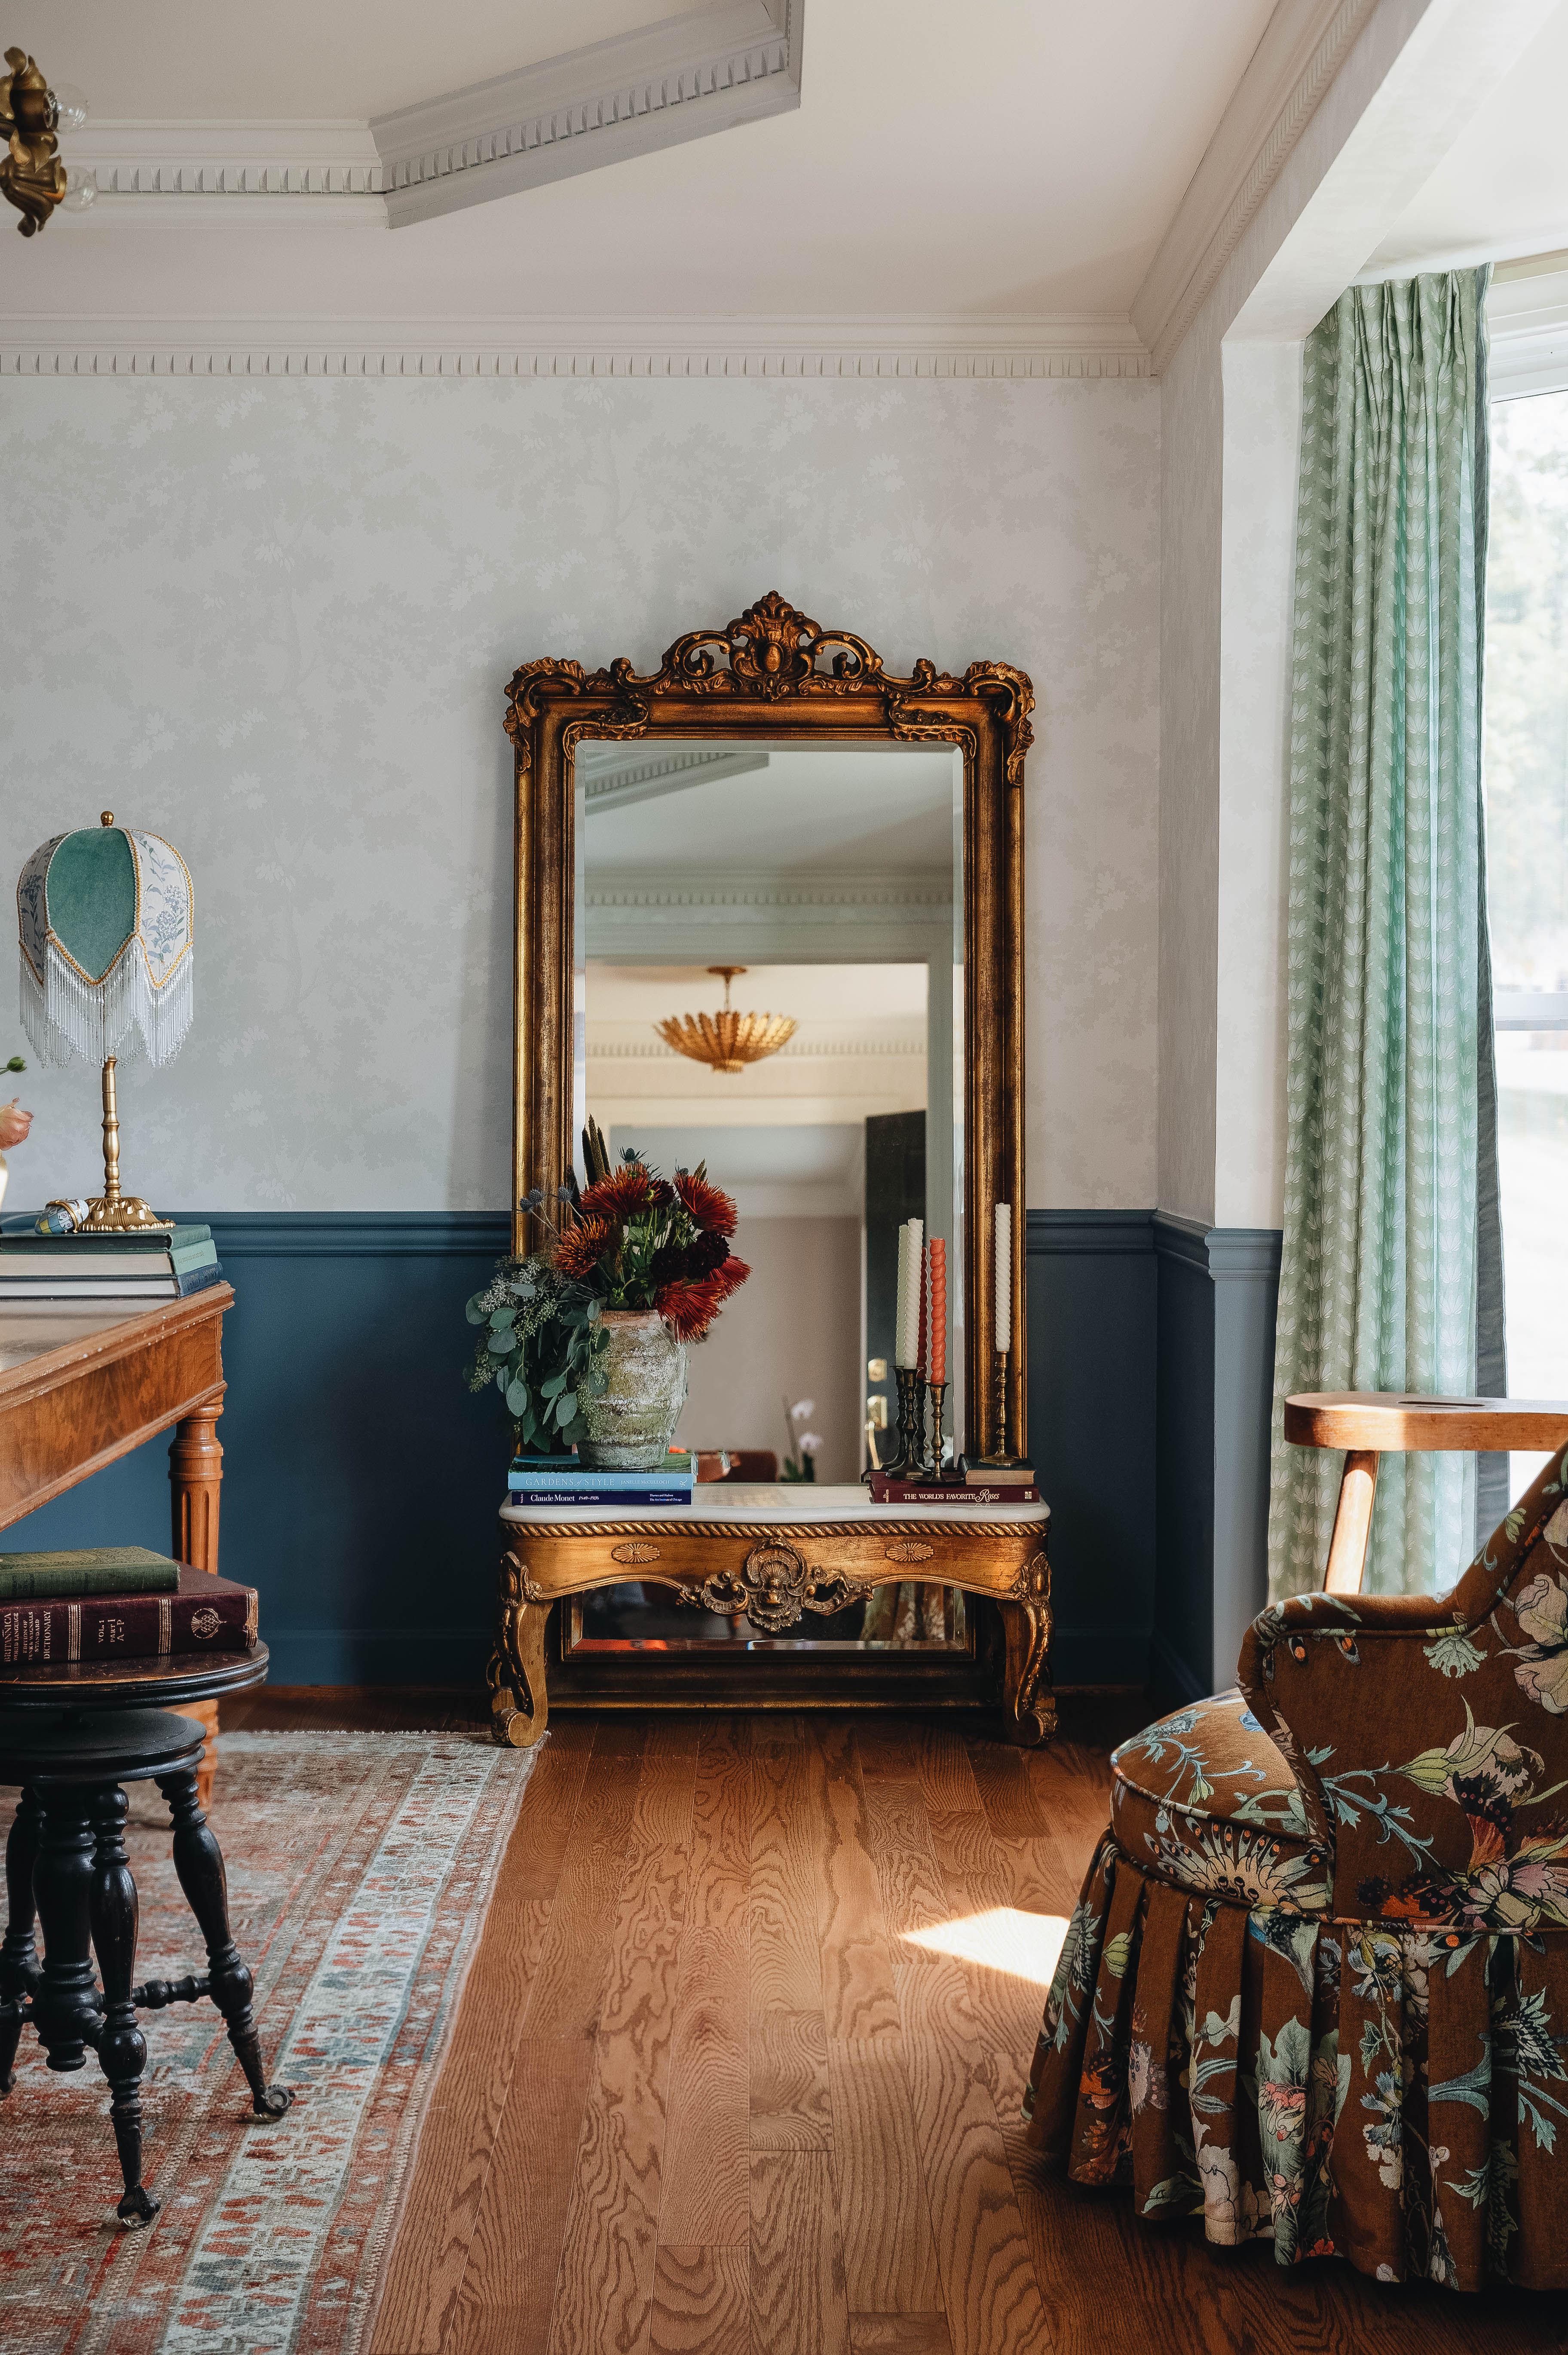 Large vintage mirror leaning on a wall in an office styled with coastal inspired green and blue curtains, white walls and blue painted wainscoting, and a wooden desk